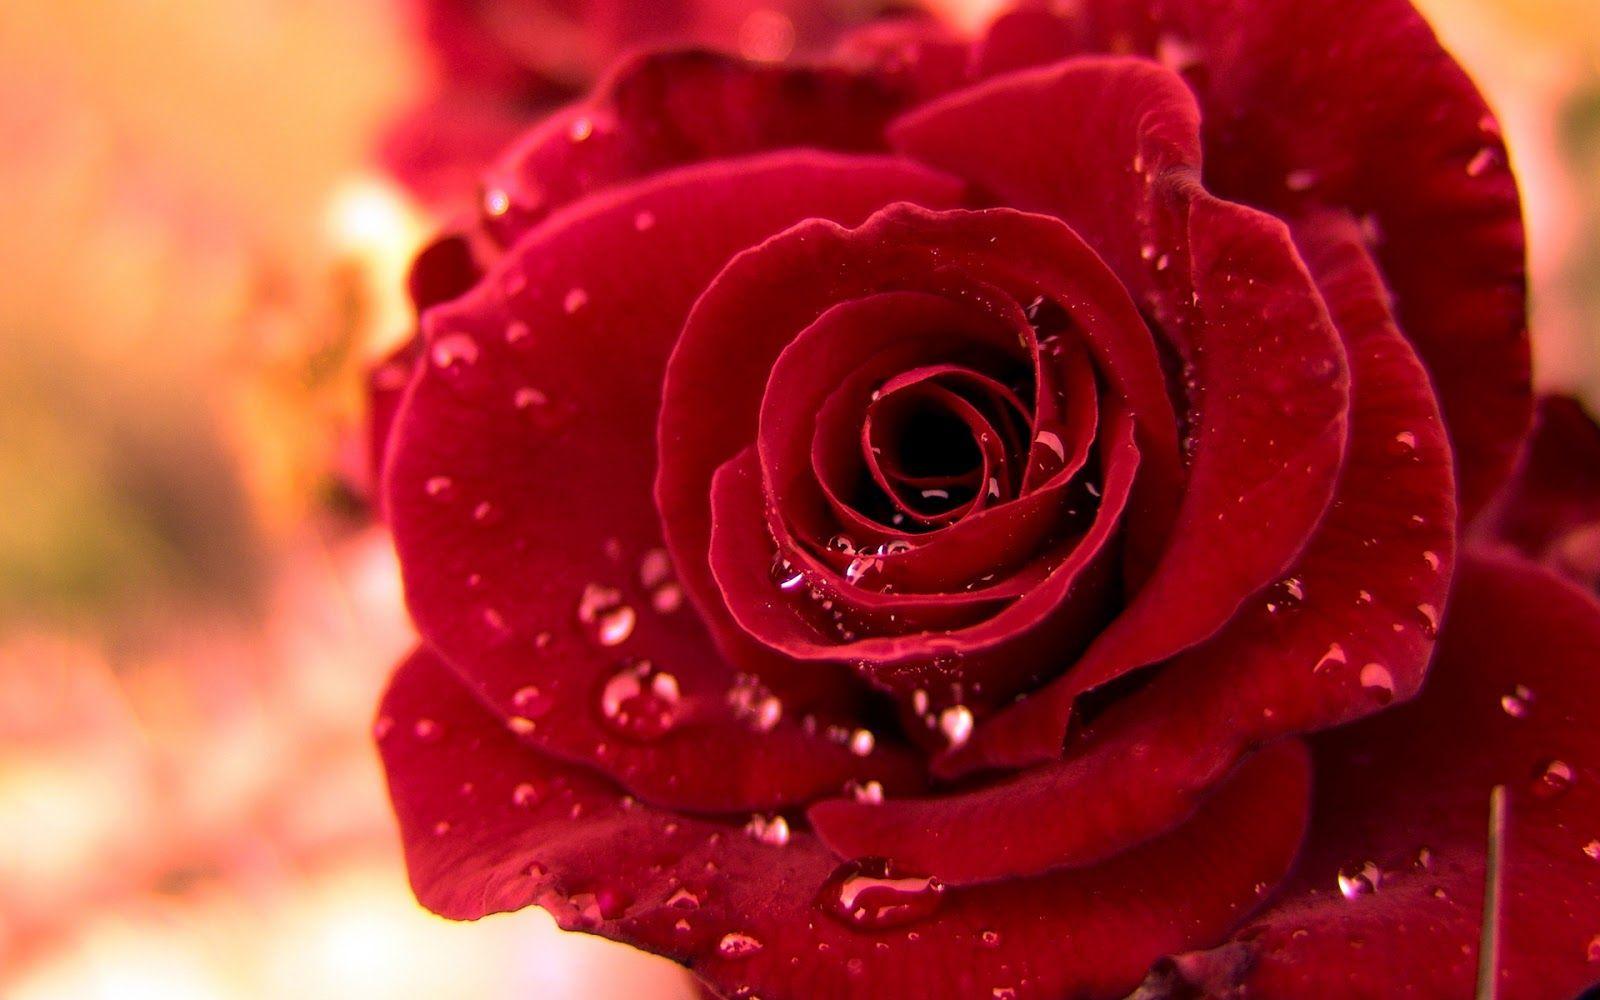 red rose flowers, rose wallpaper, wallpaper, picture of rose, red